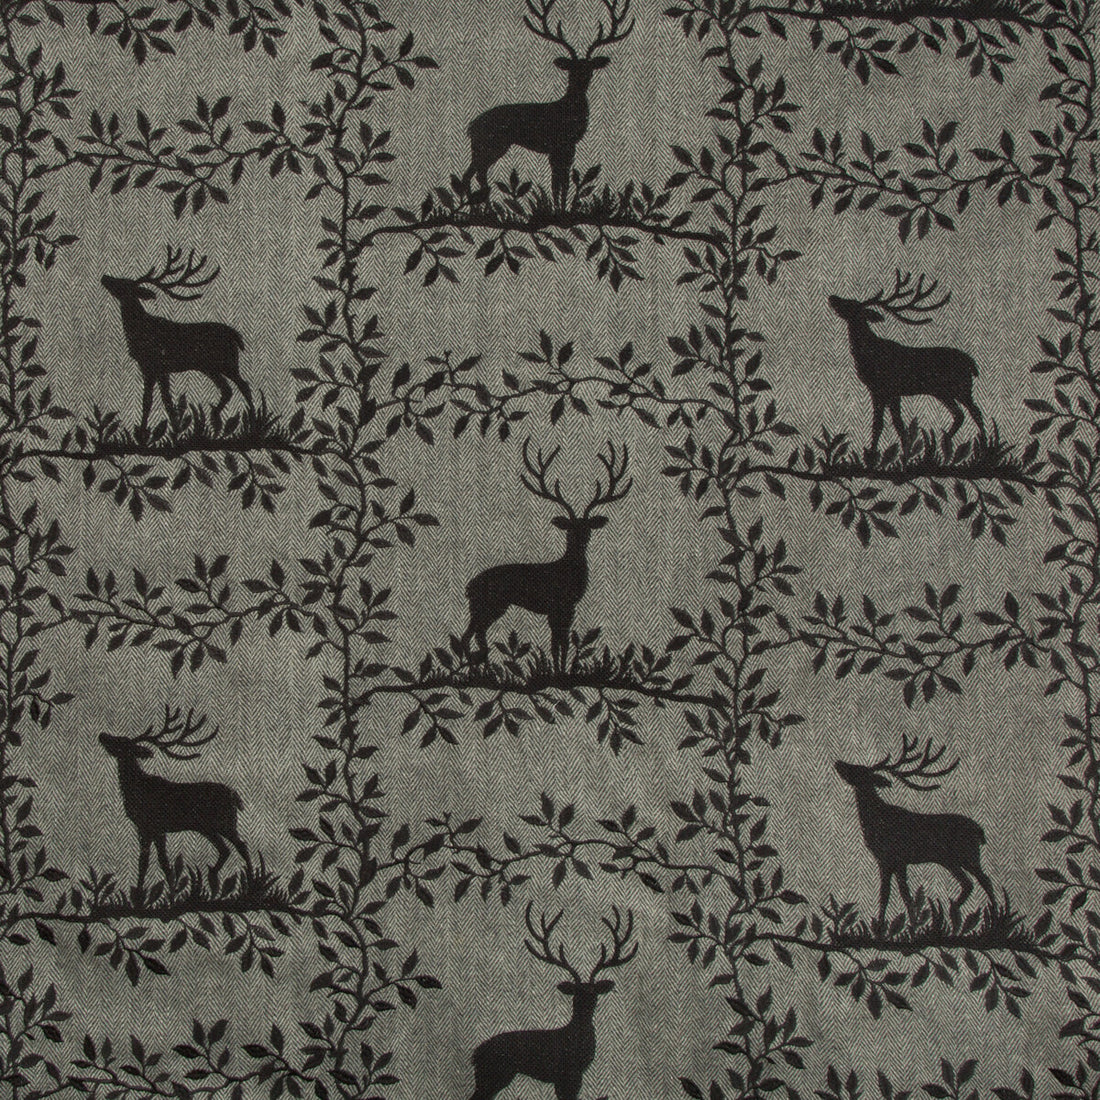 Caribou Emb fabric in black color - pattern 2017123.8.0 - by Lee Jofa in the Lodge II Weaves And Embroideries collection